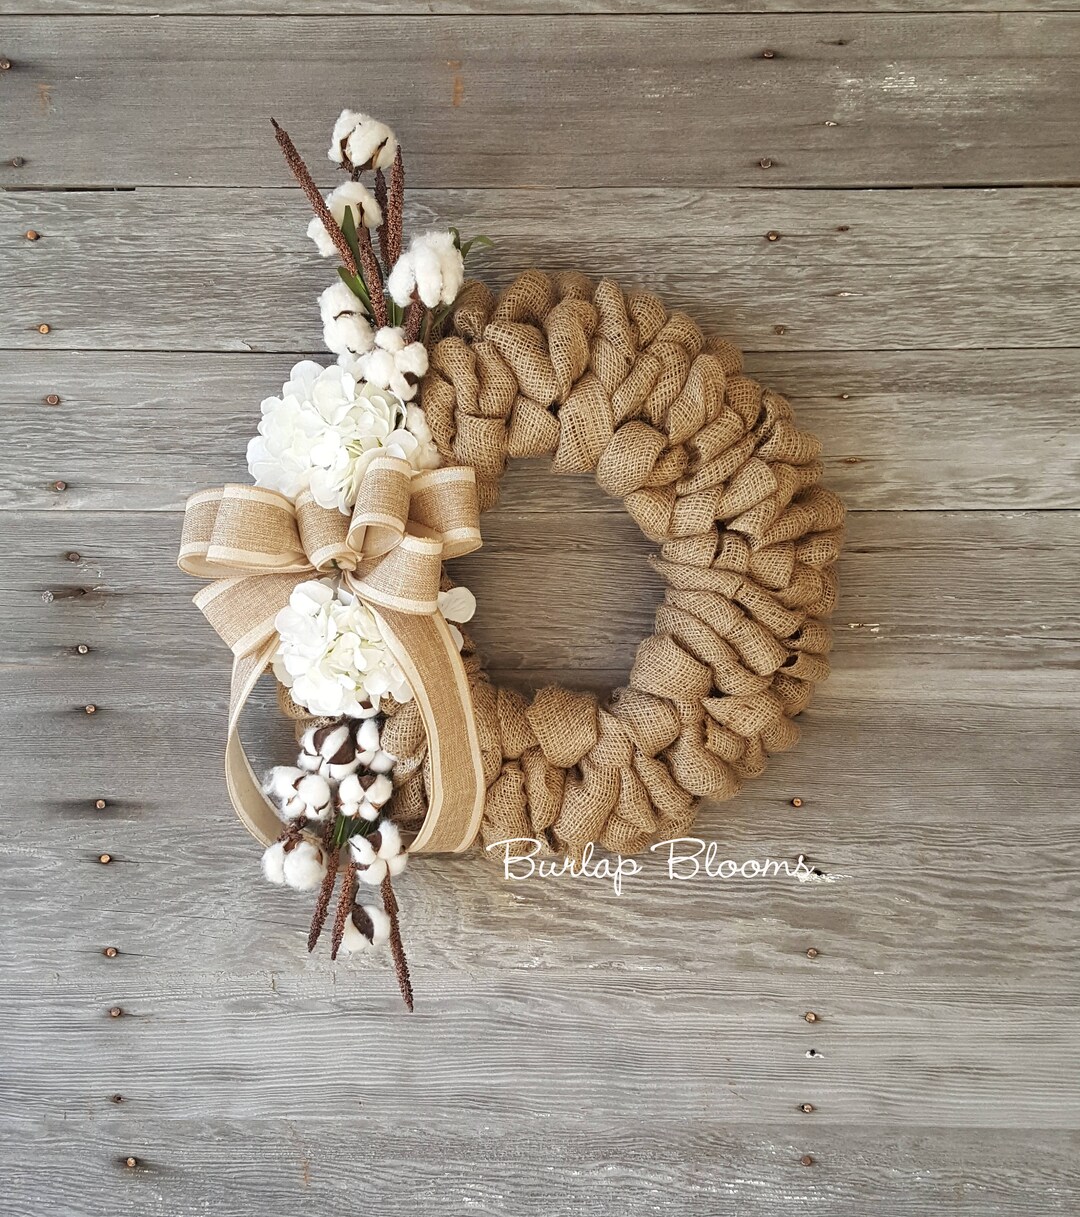 DiyDreaming - Hey Crafty Friends! Here are the burlap flowers and the  braided rope wreath we made yesterday. I almost forgot to add the burlap  leaves to the wreath. I think they